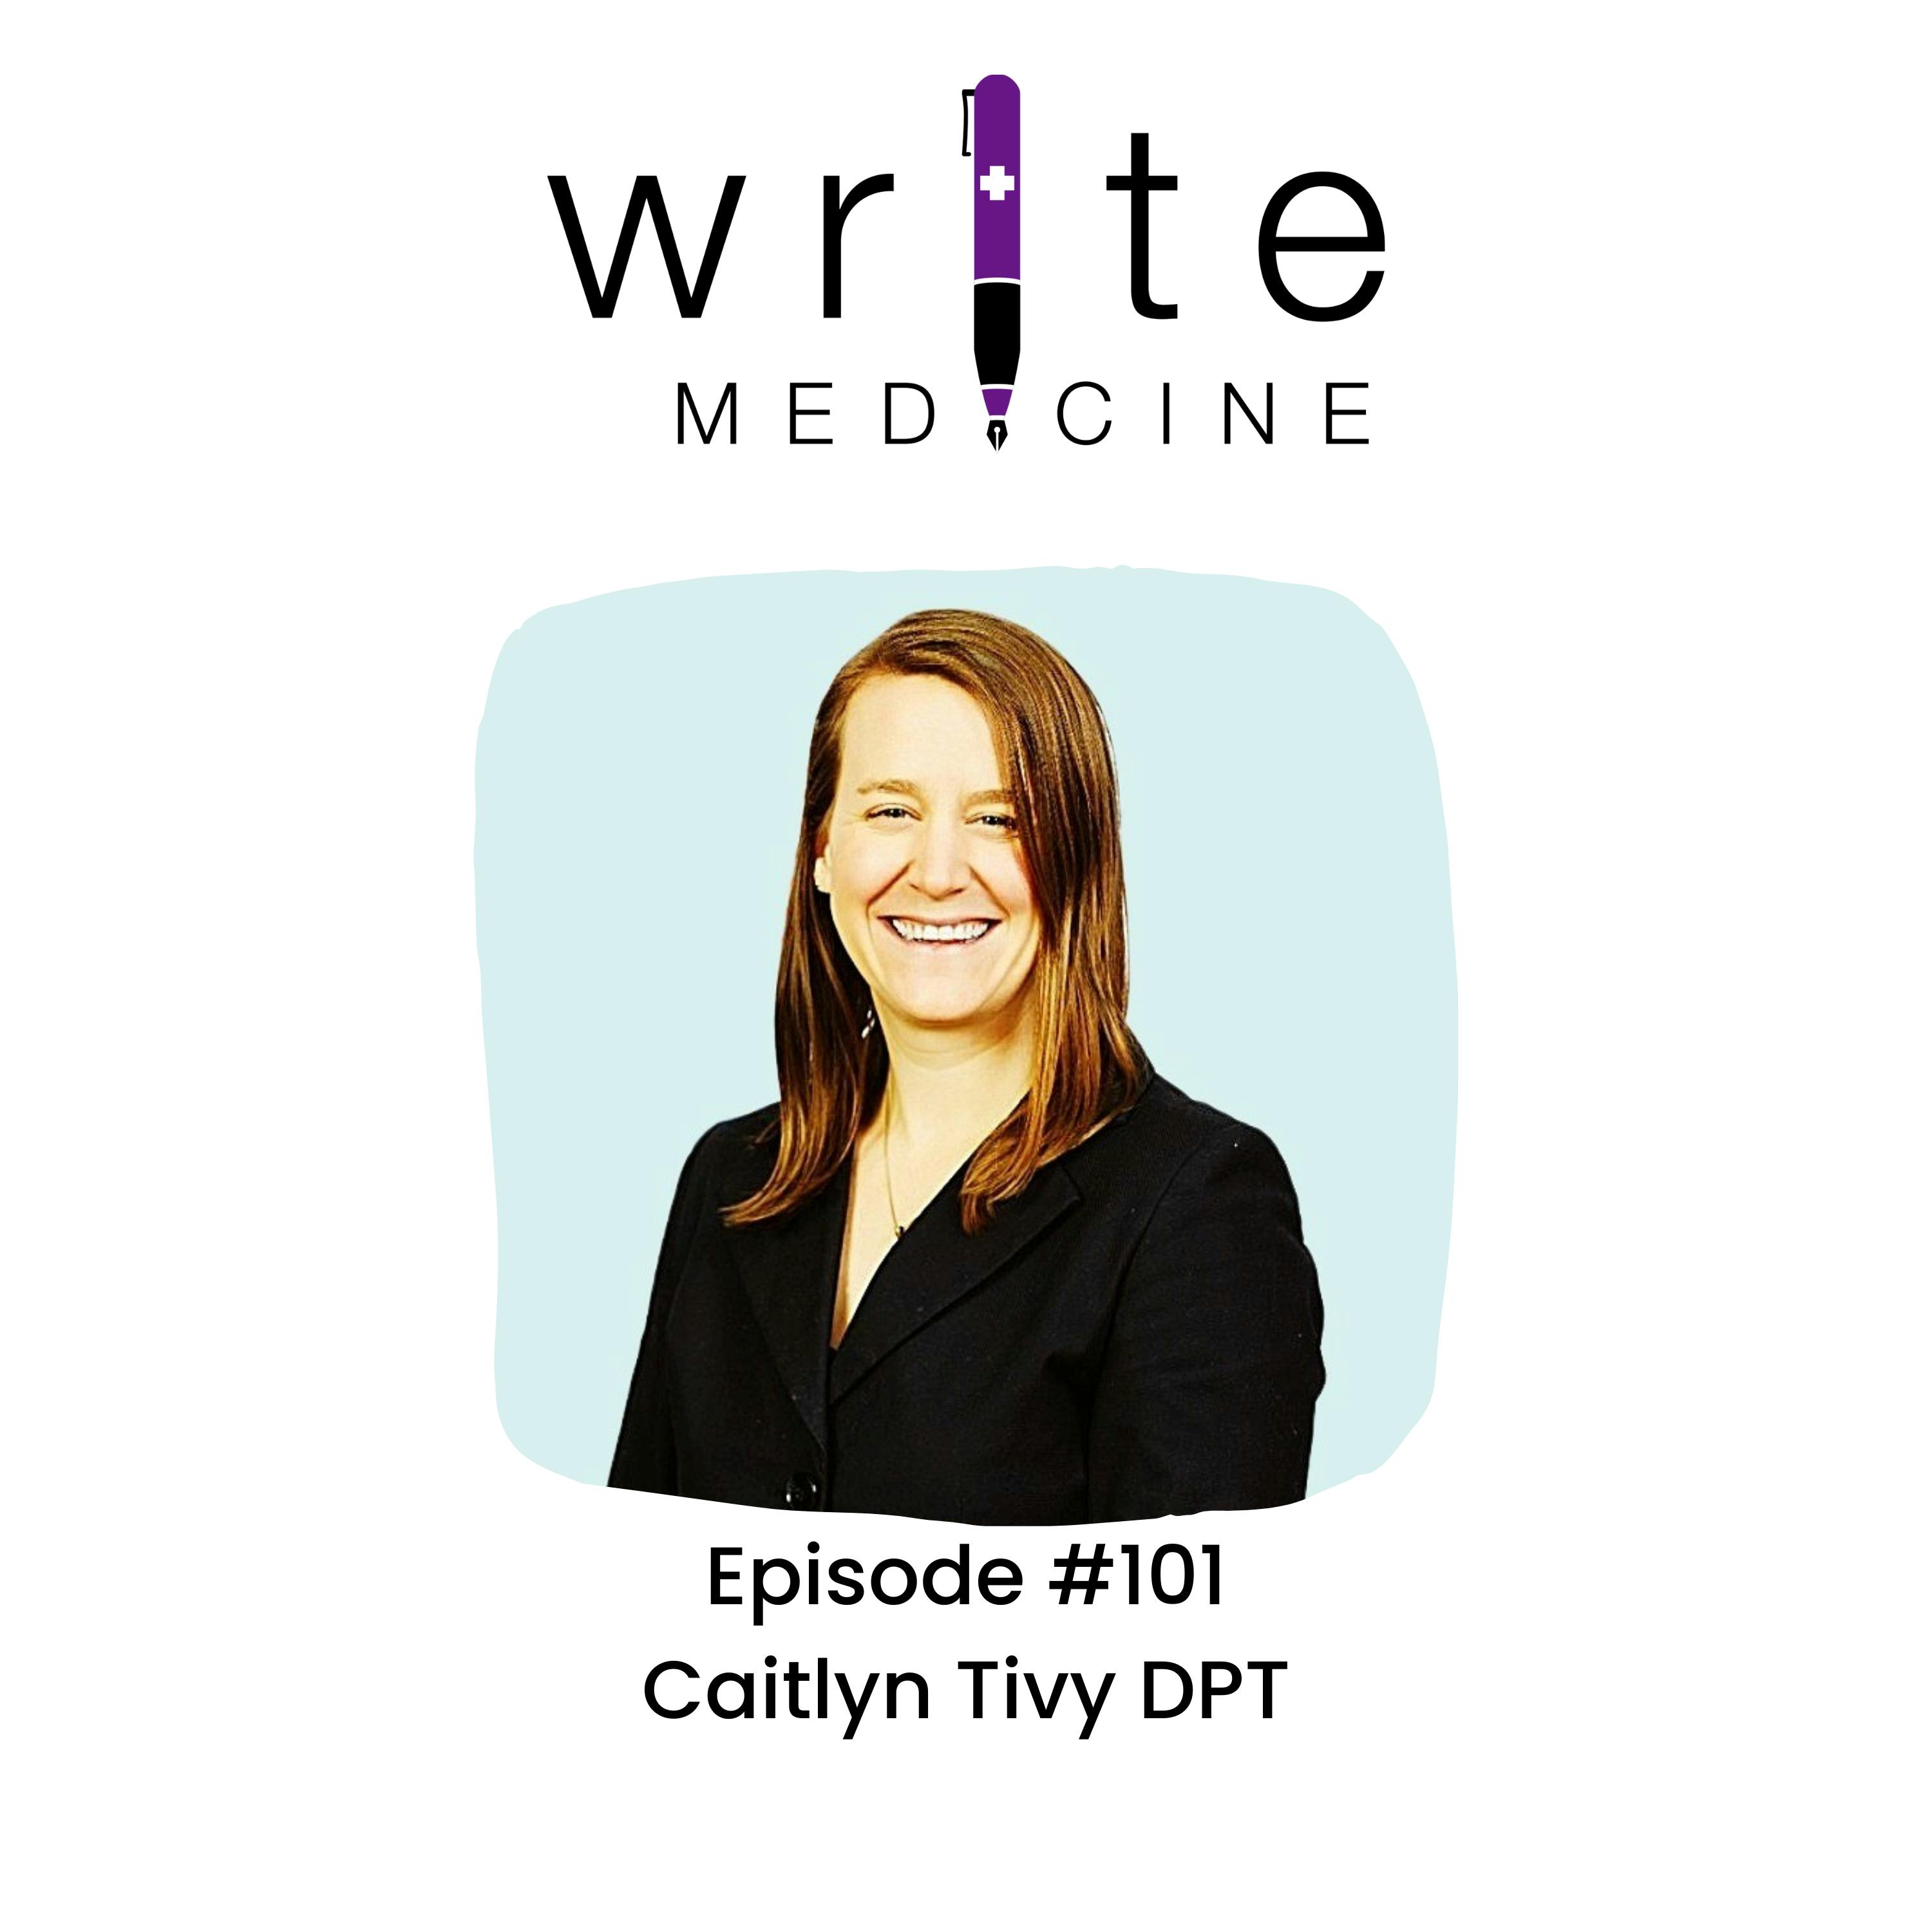 Femtech and Inclusive CME/CPD: A Conversation with Caitlyn Tivy DPT